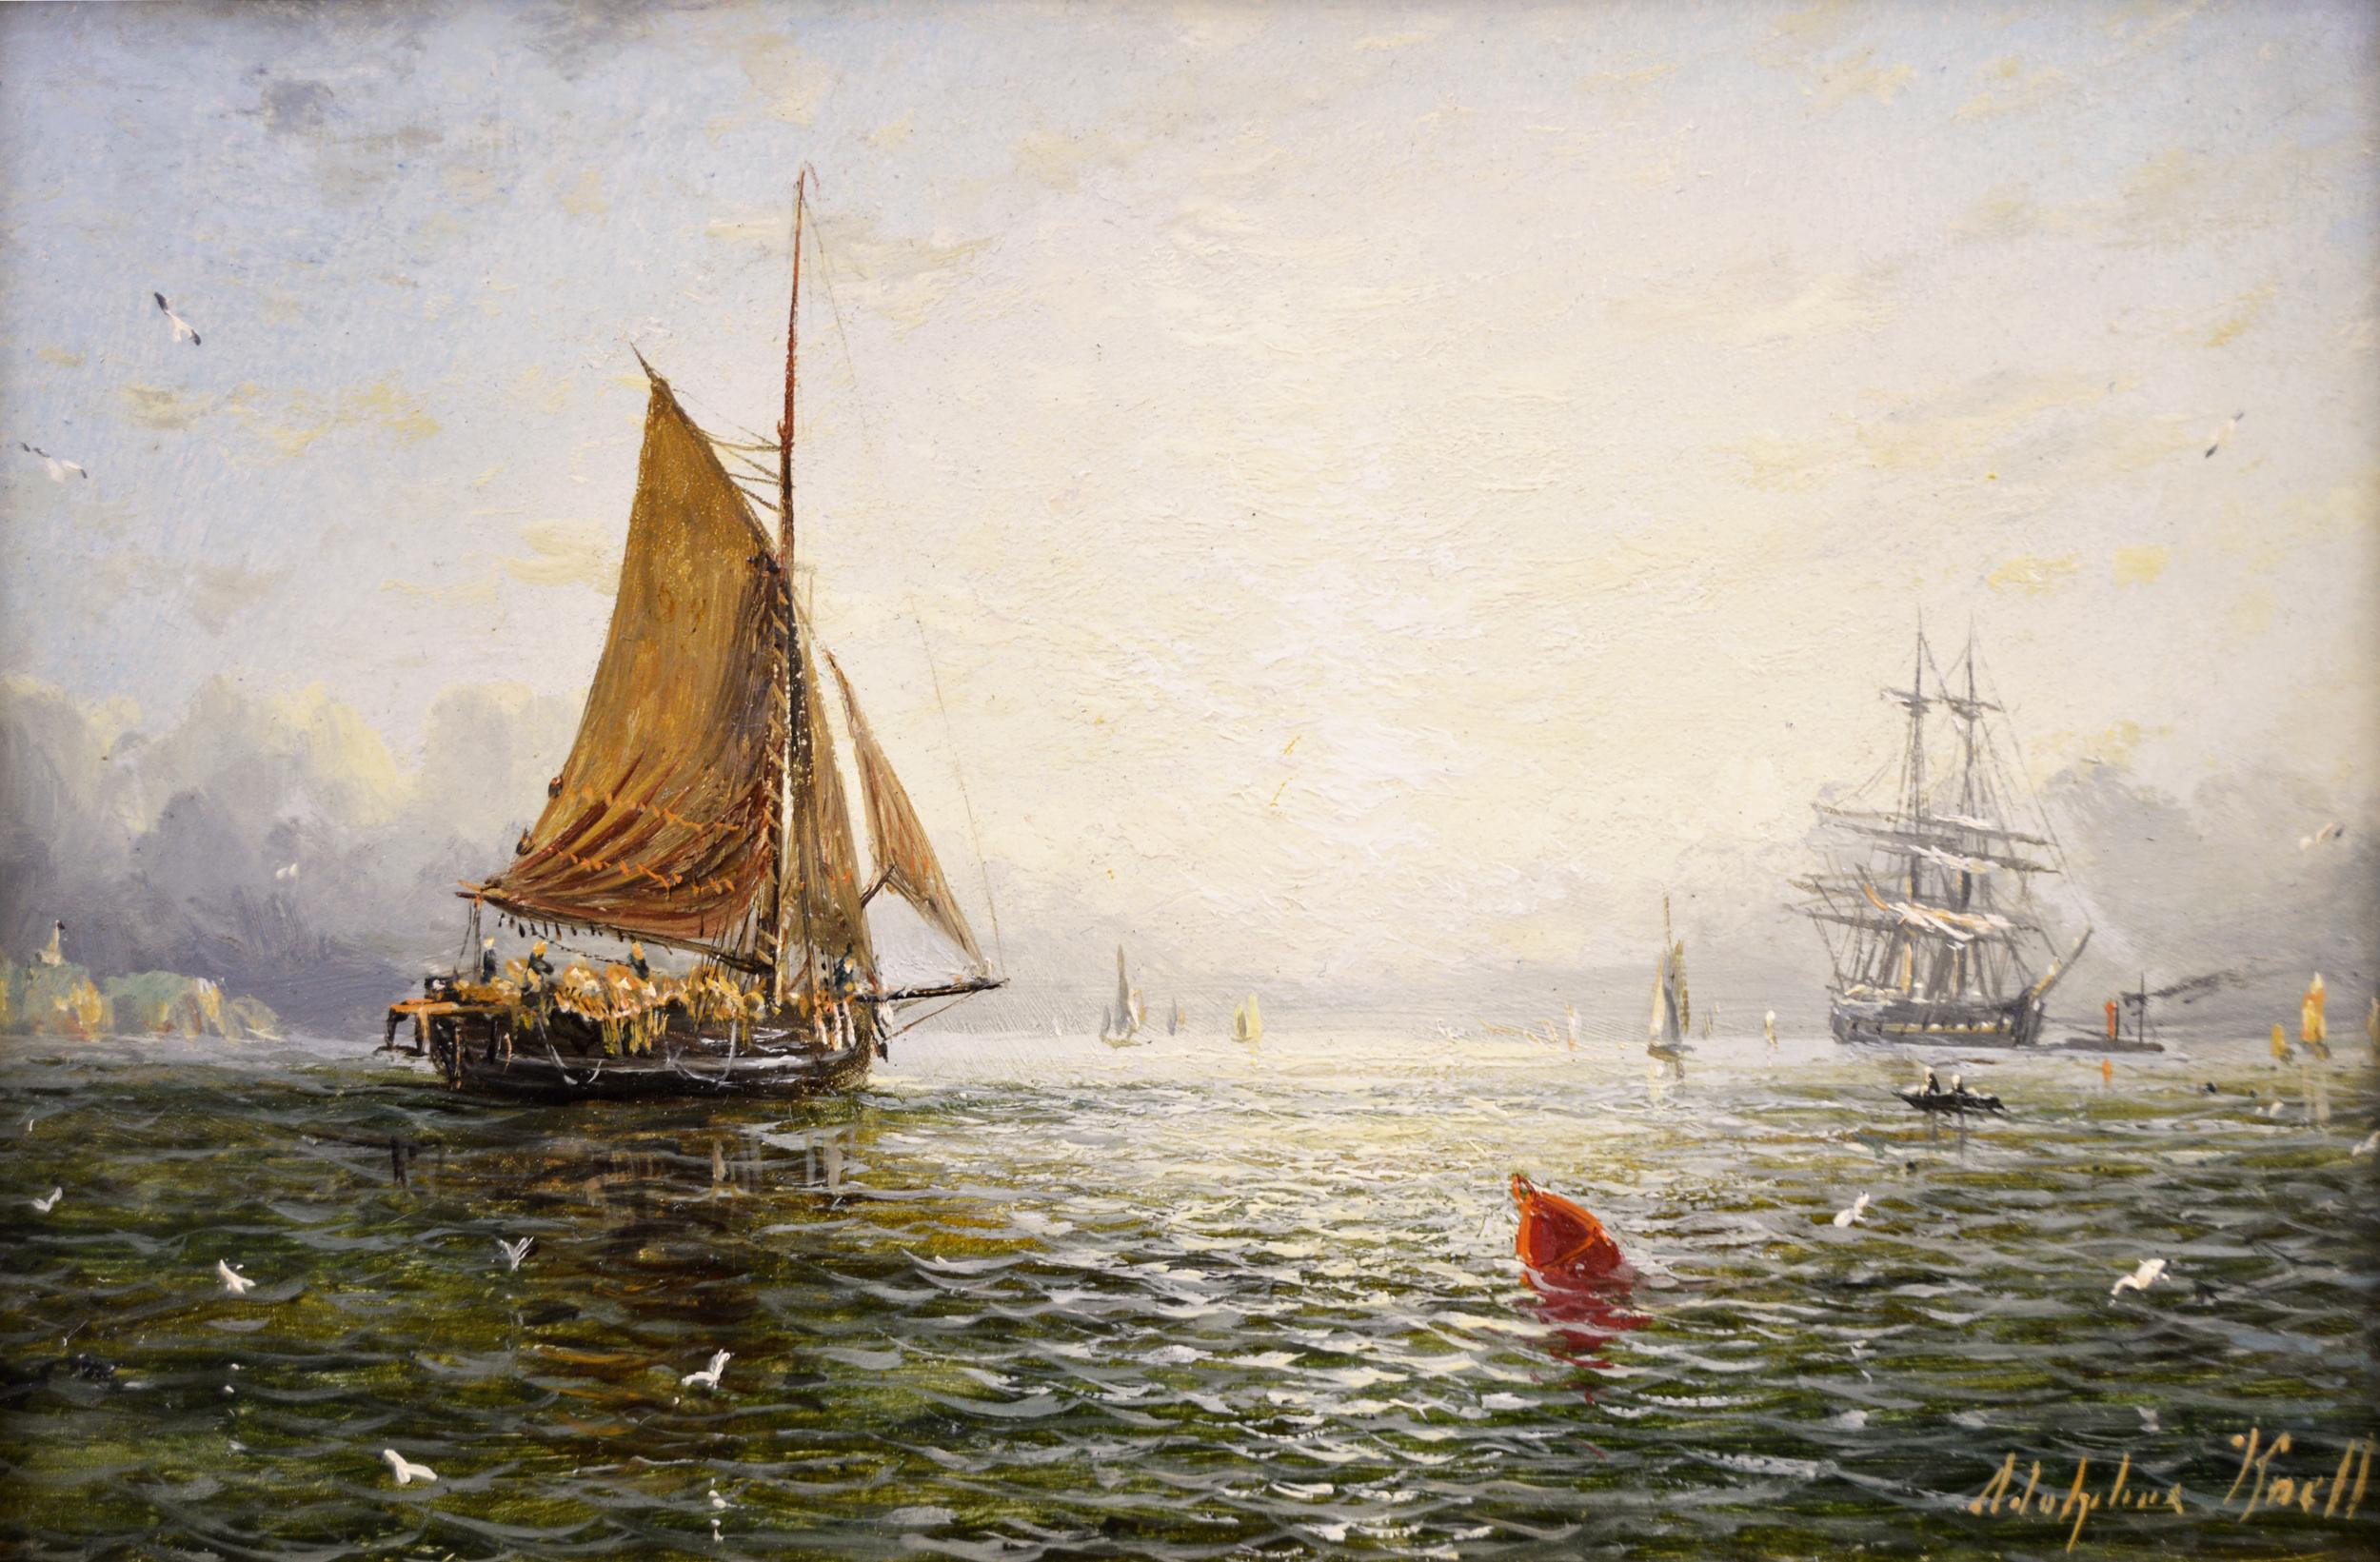 19th Century pair of seascape oil paintings of fishing boats  - Painting by Adolphus Knell